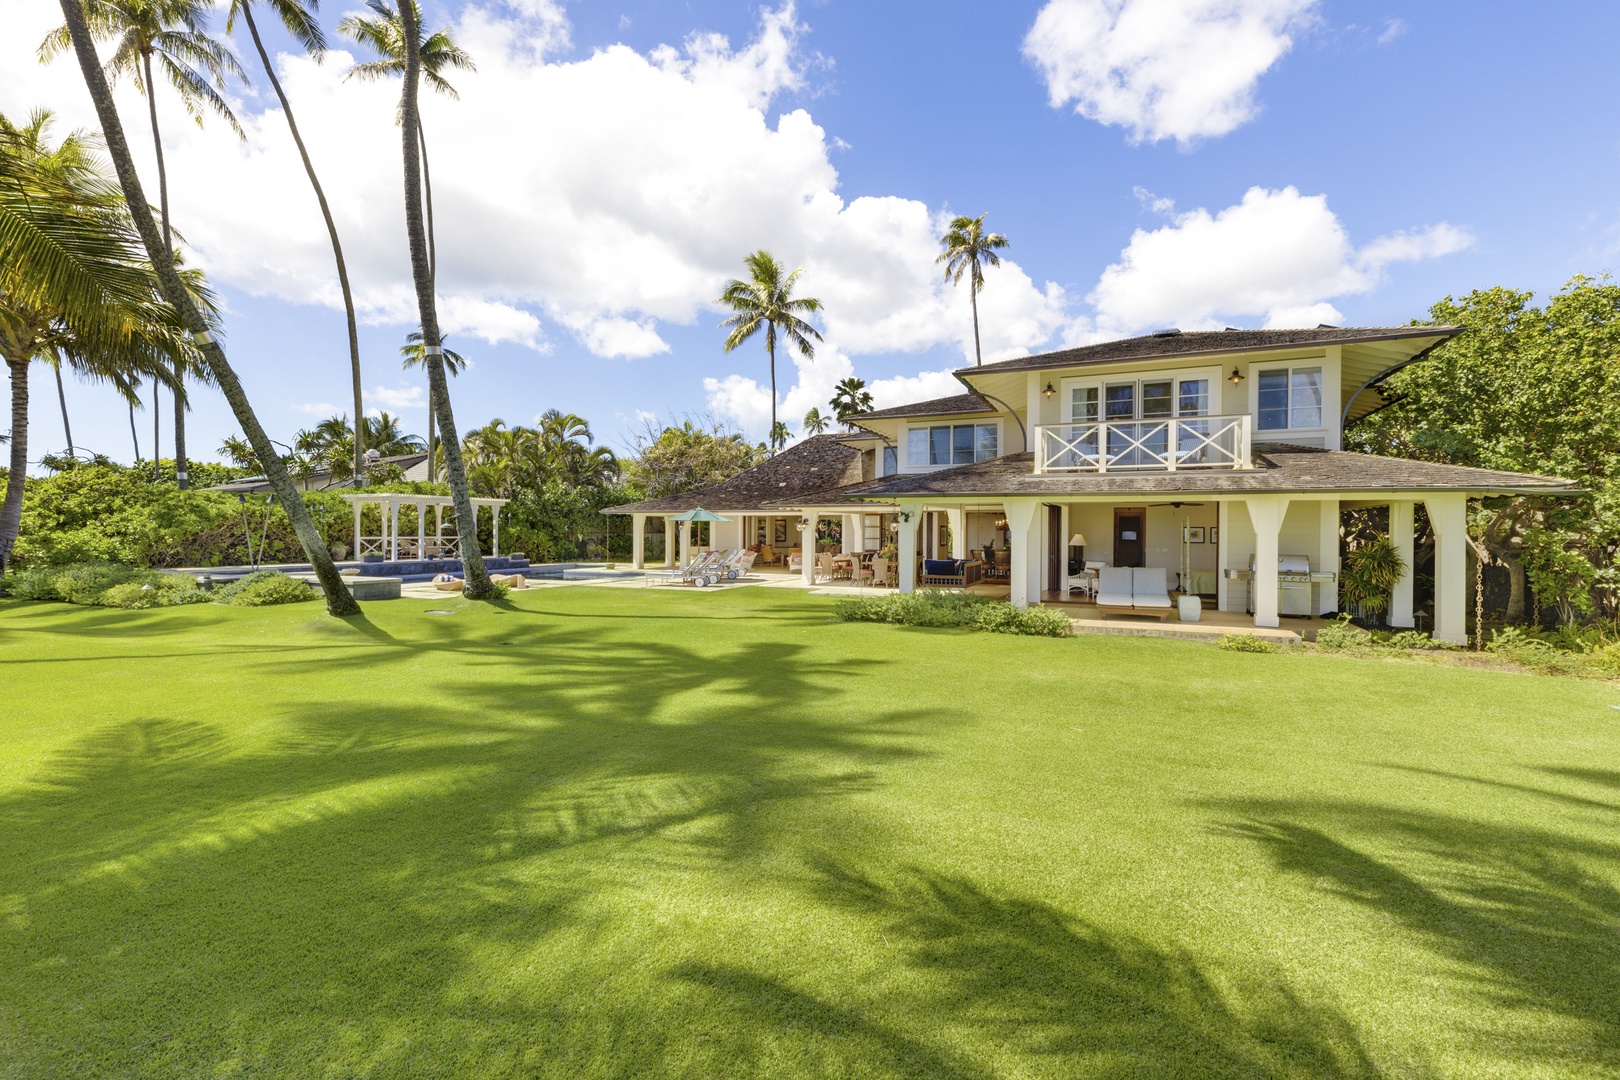 Honolulu Vacation Rentals, Kahala Beachside Estate - Expansive yard with tropical landscaping